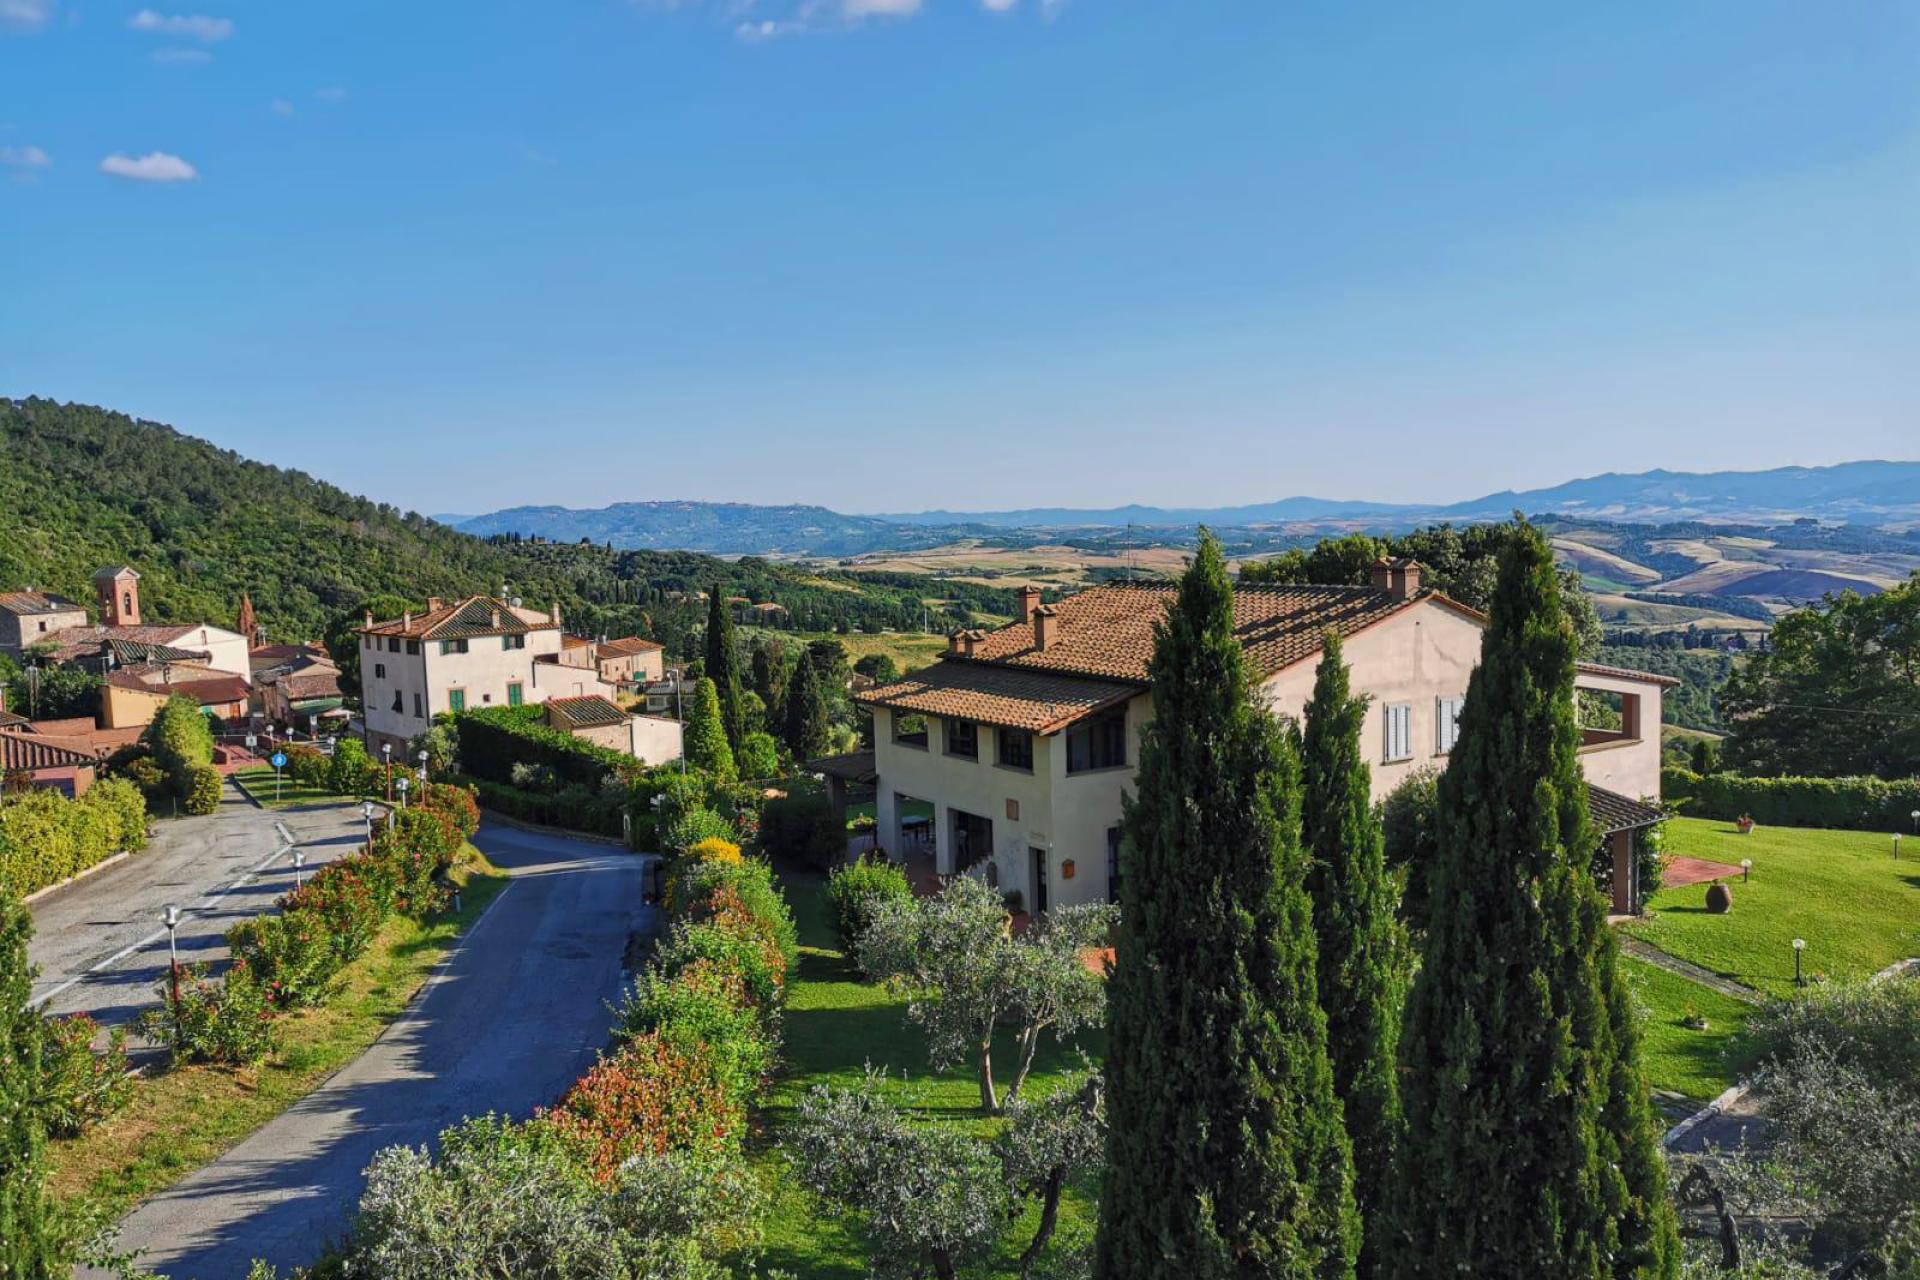 Small agriturismo within walking distance of a village